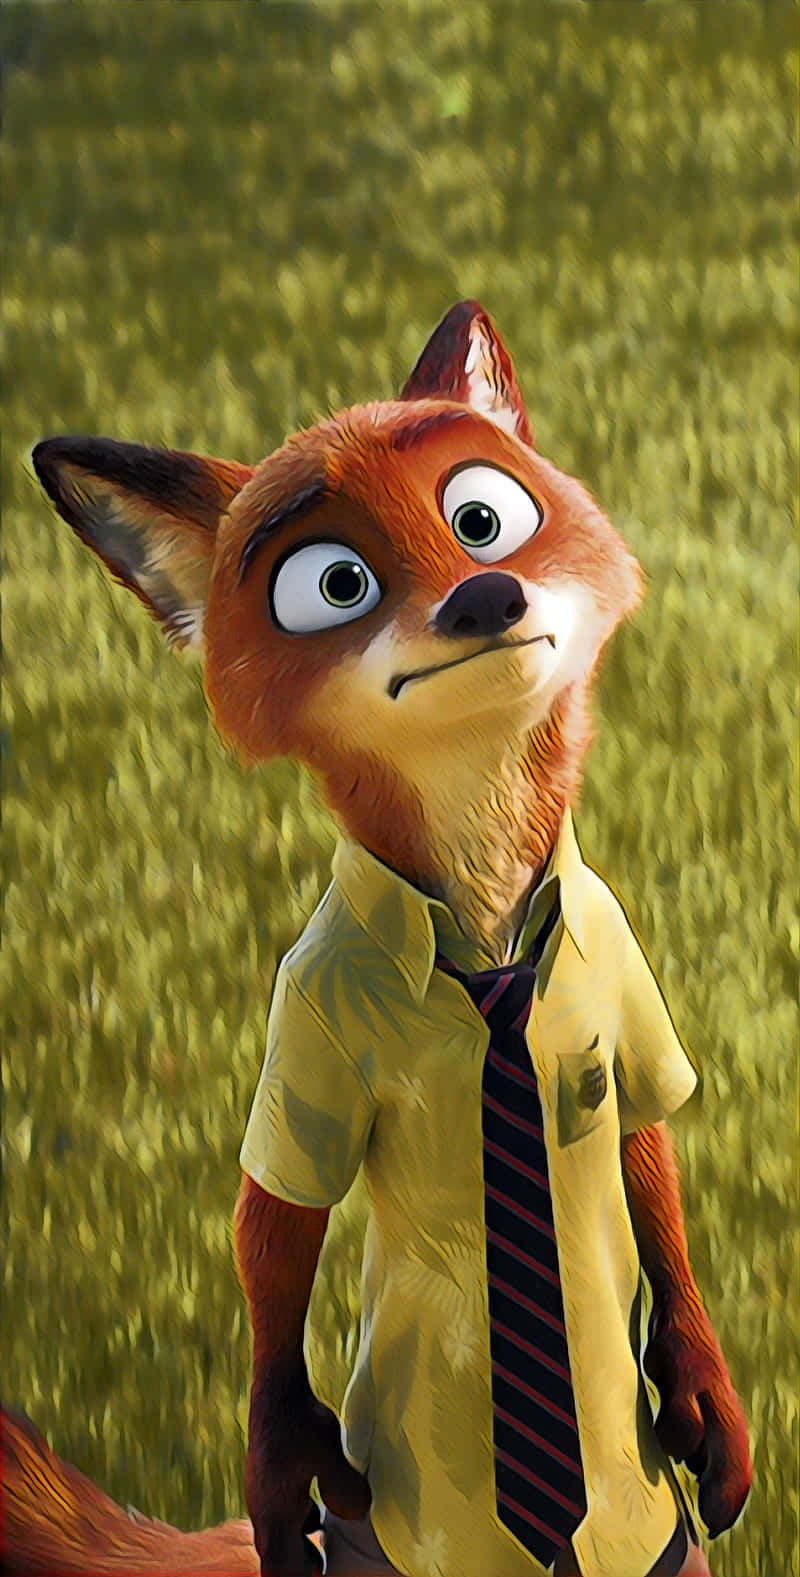 Nick Wilde Sly Fox Smile Background